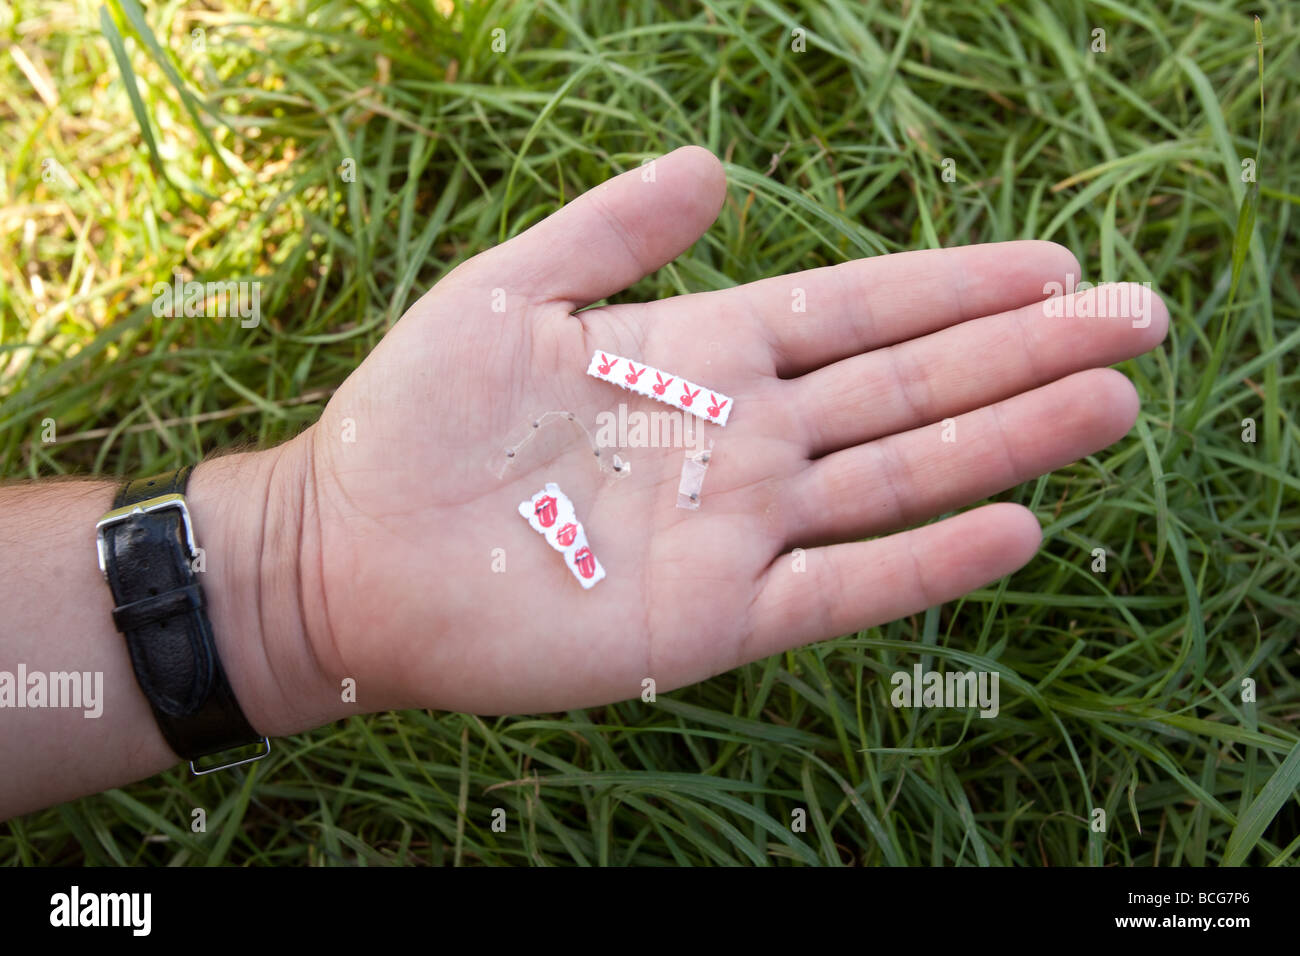 Various types of Acid LSD trips and microdots held in a mans hand Stock Photo